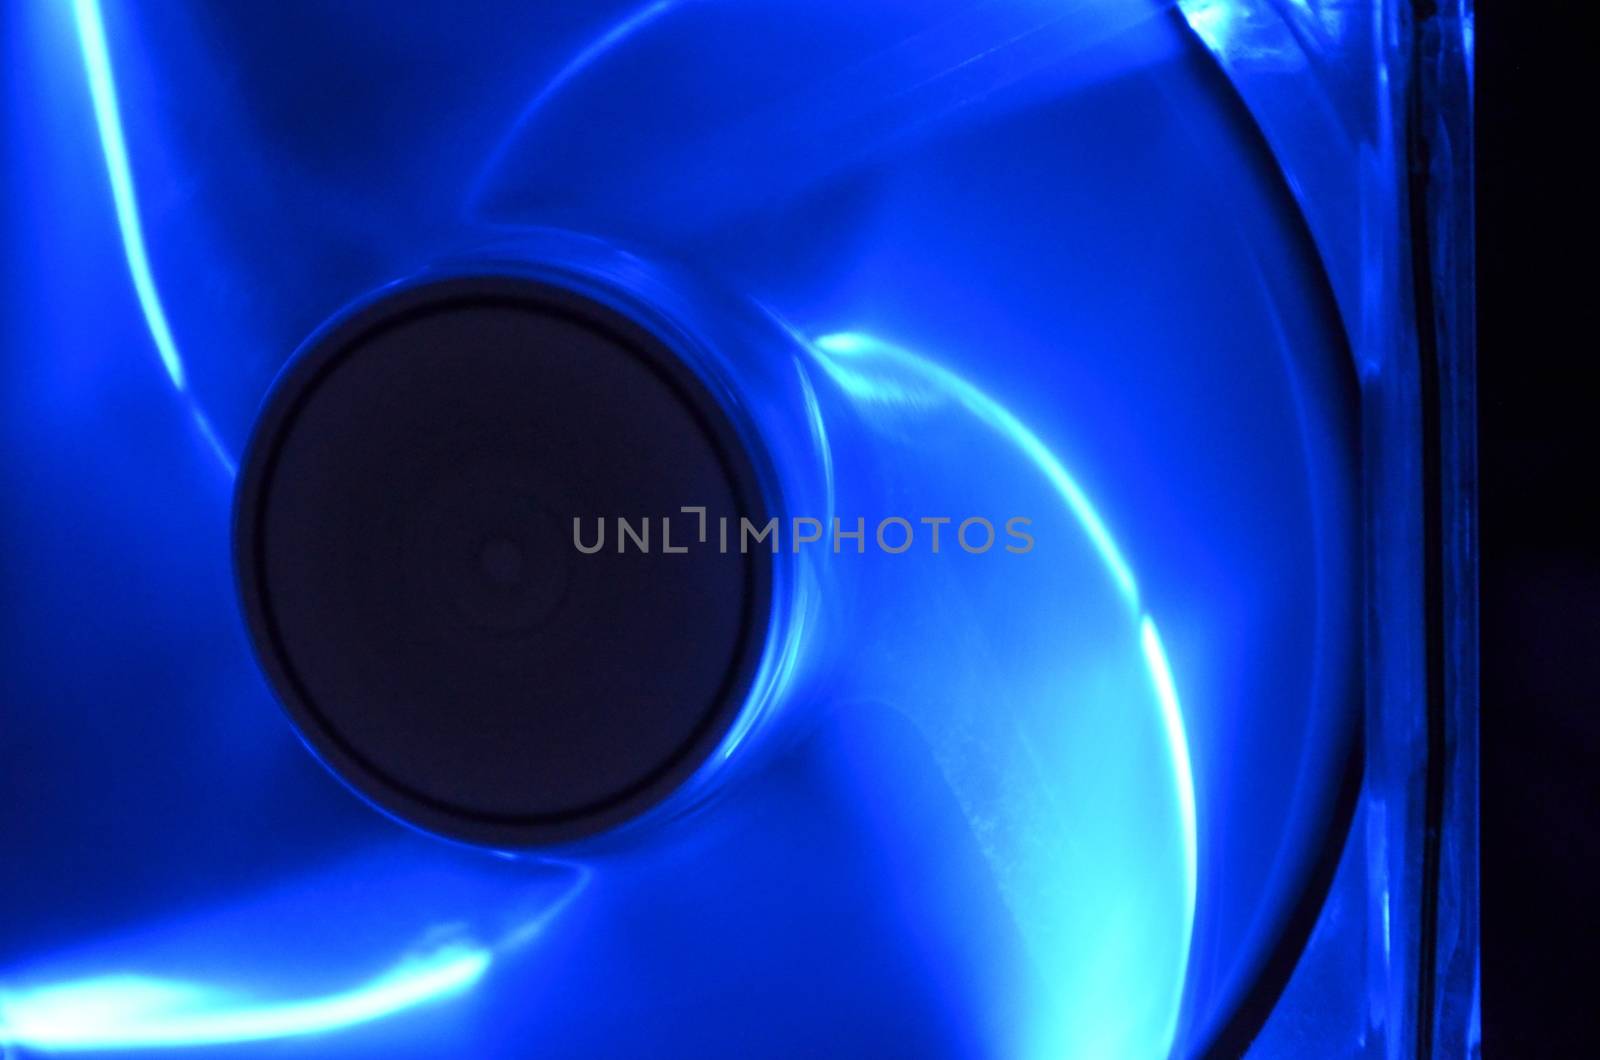 Fan blades of computer processor cooler. With color blu.